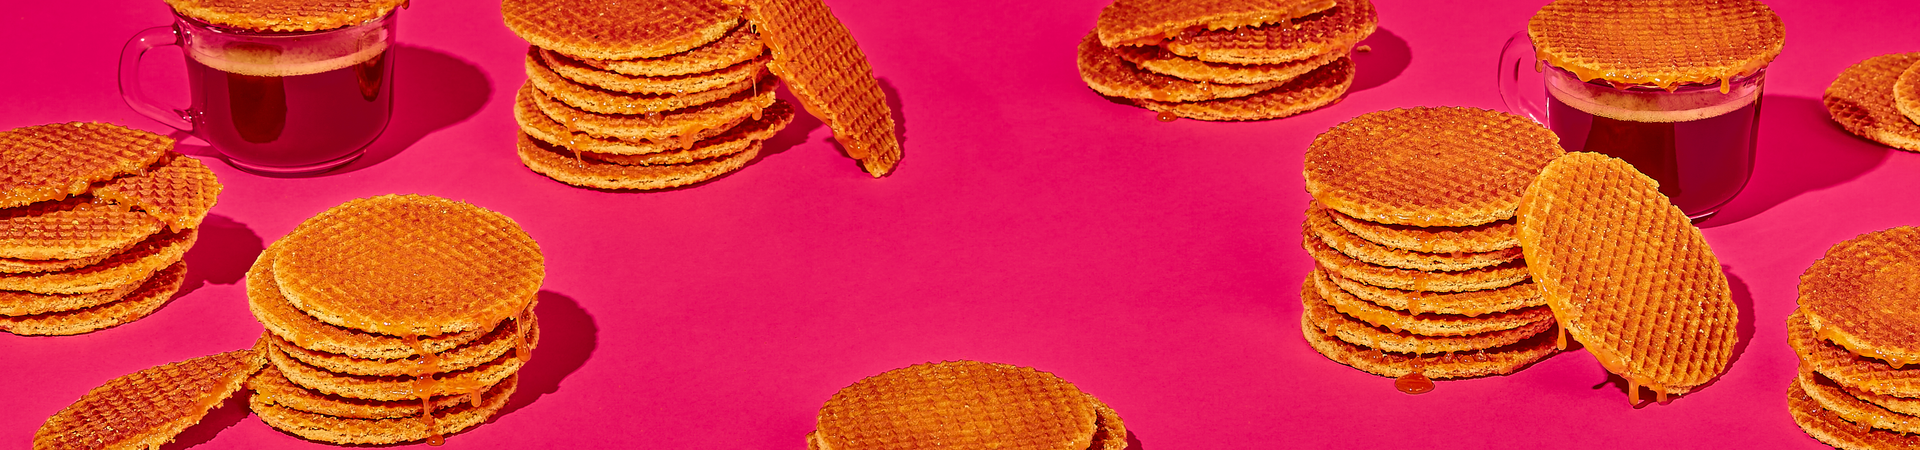 Banner of Stroopwafels collection